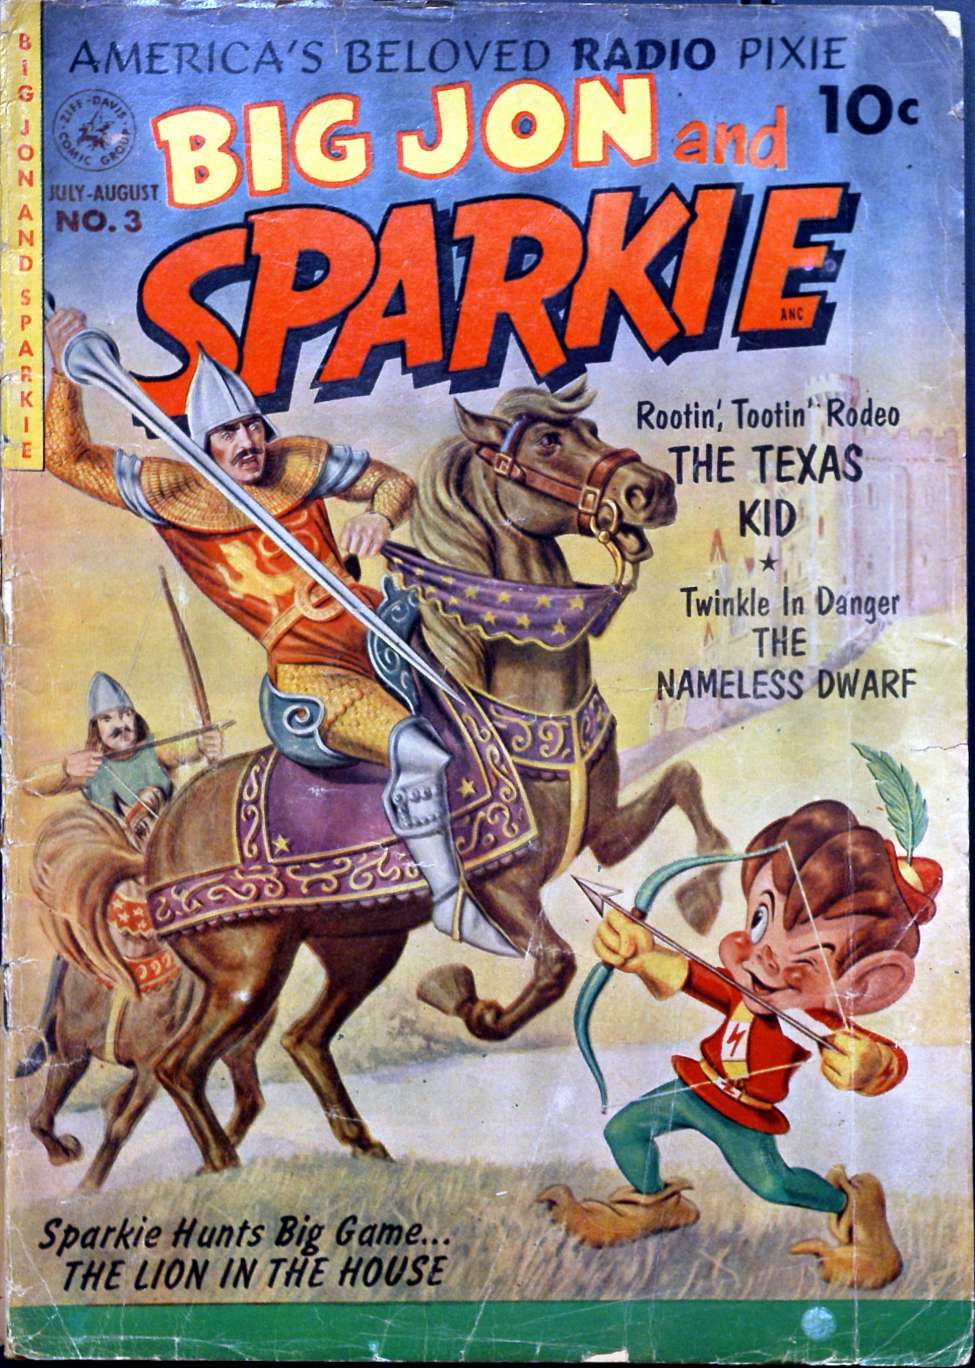 Book Cover For Sparkie, Radio Pixie 3